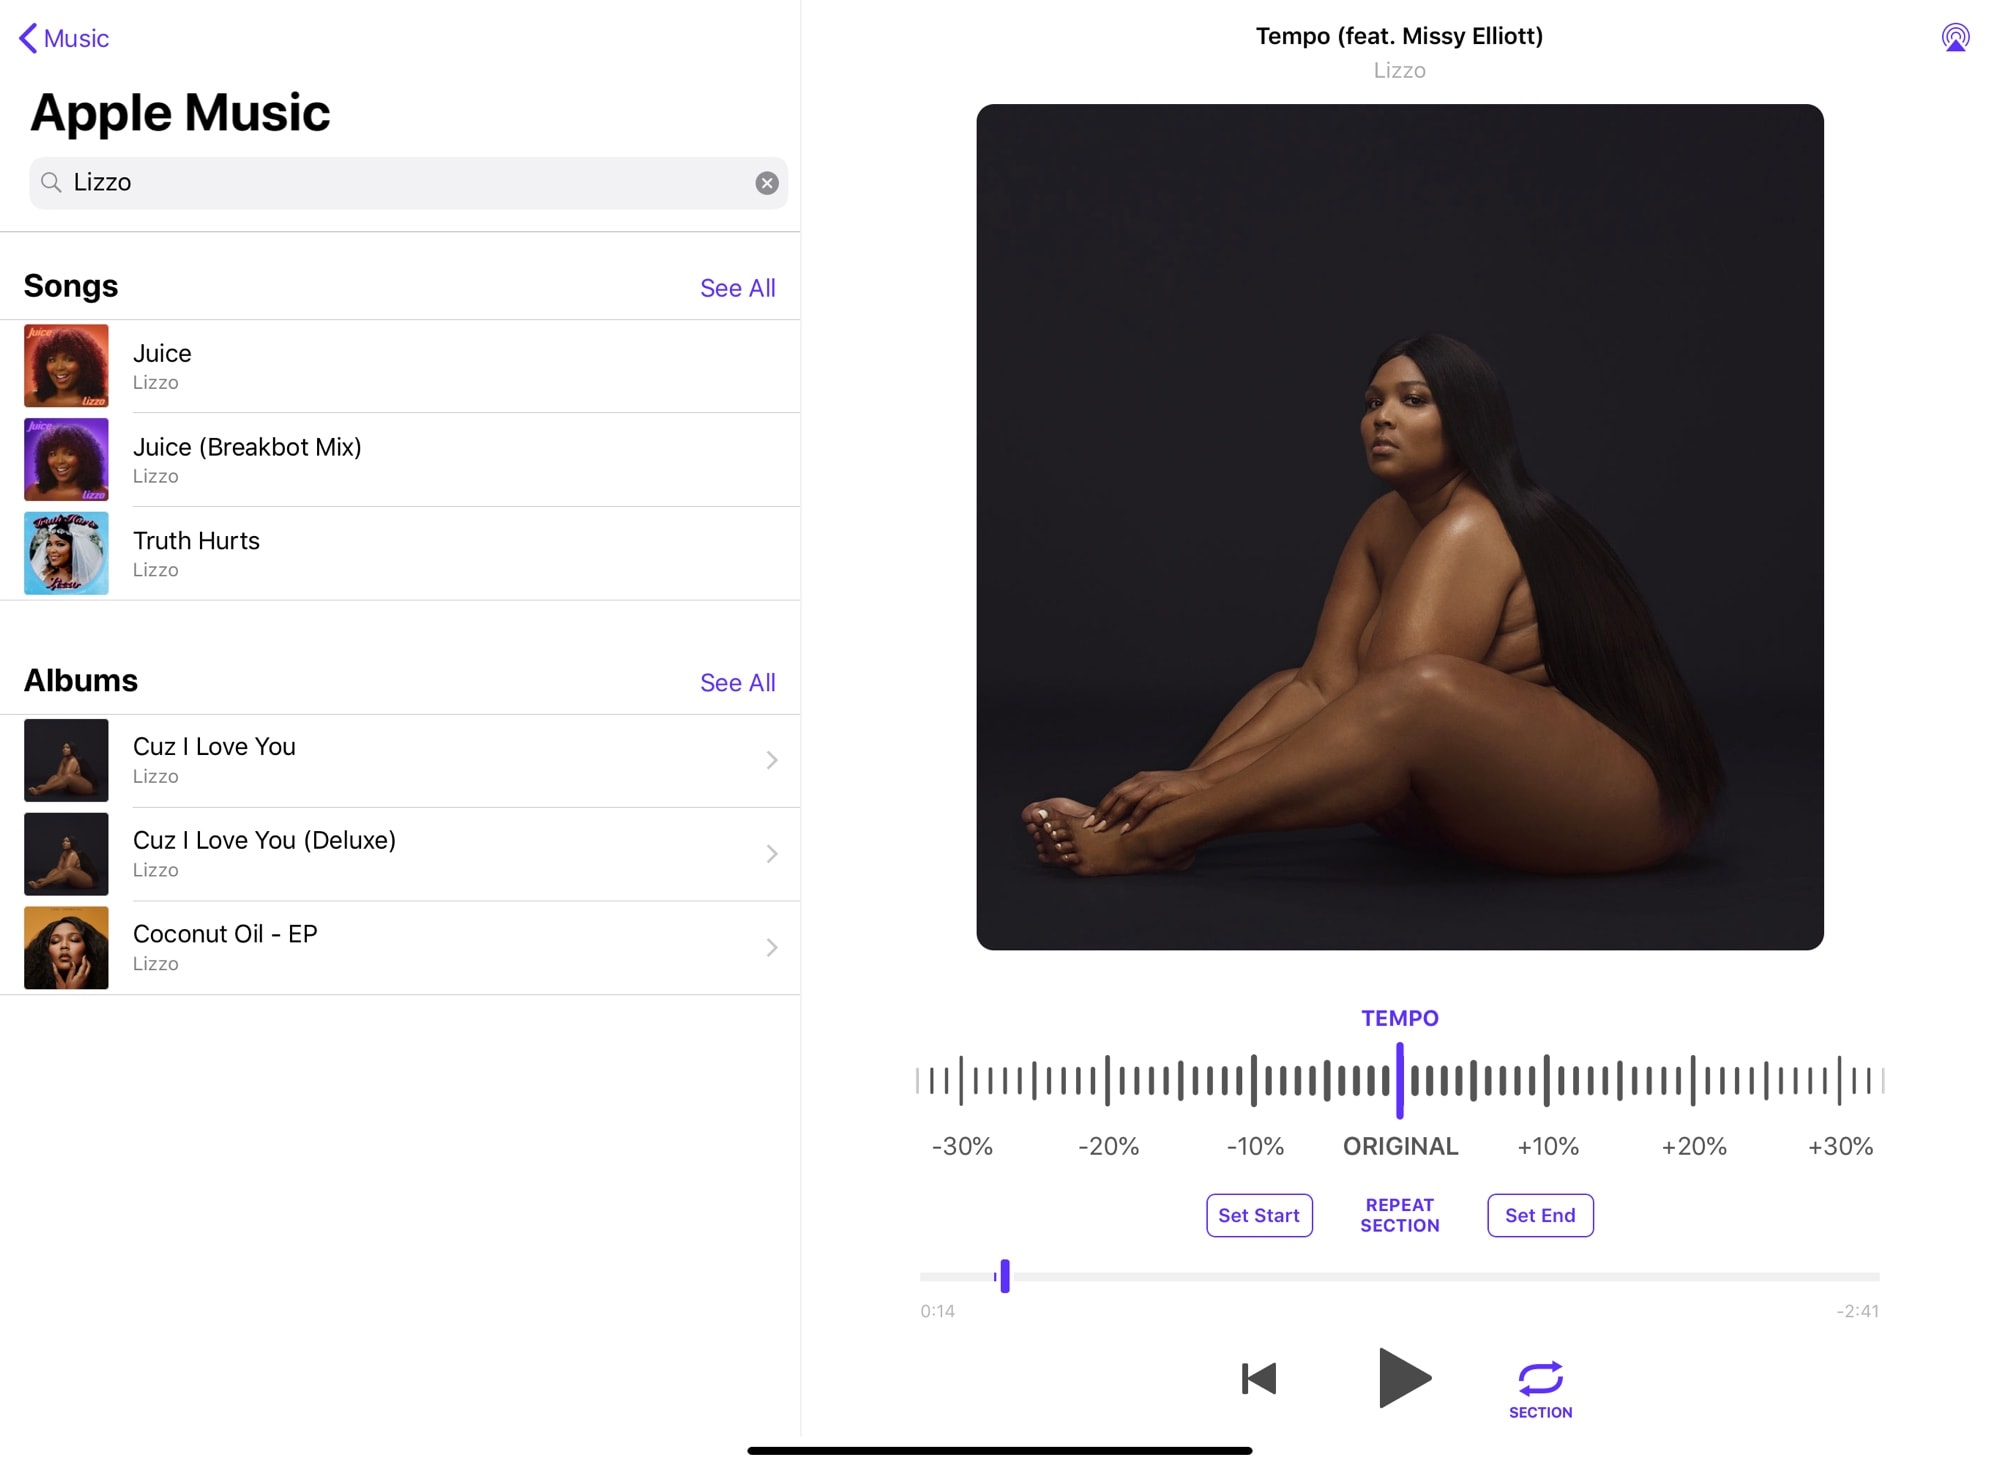 Search and use any song in Apple Music, or your own library.